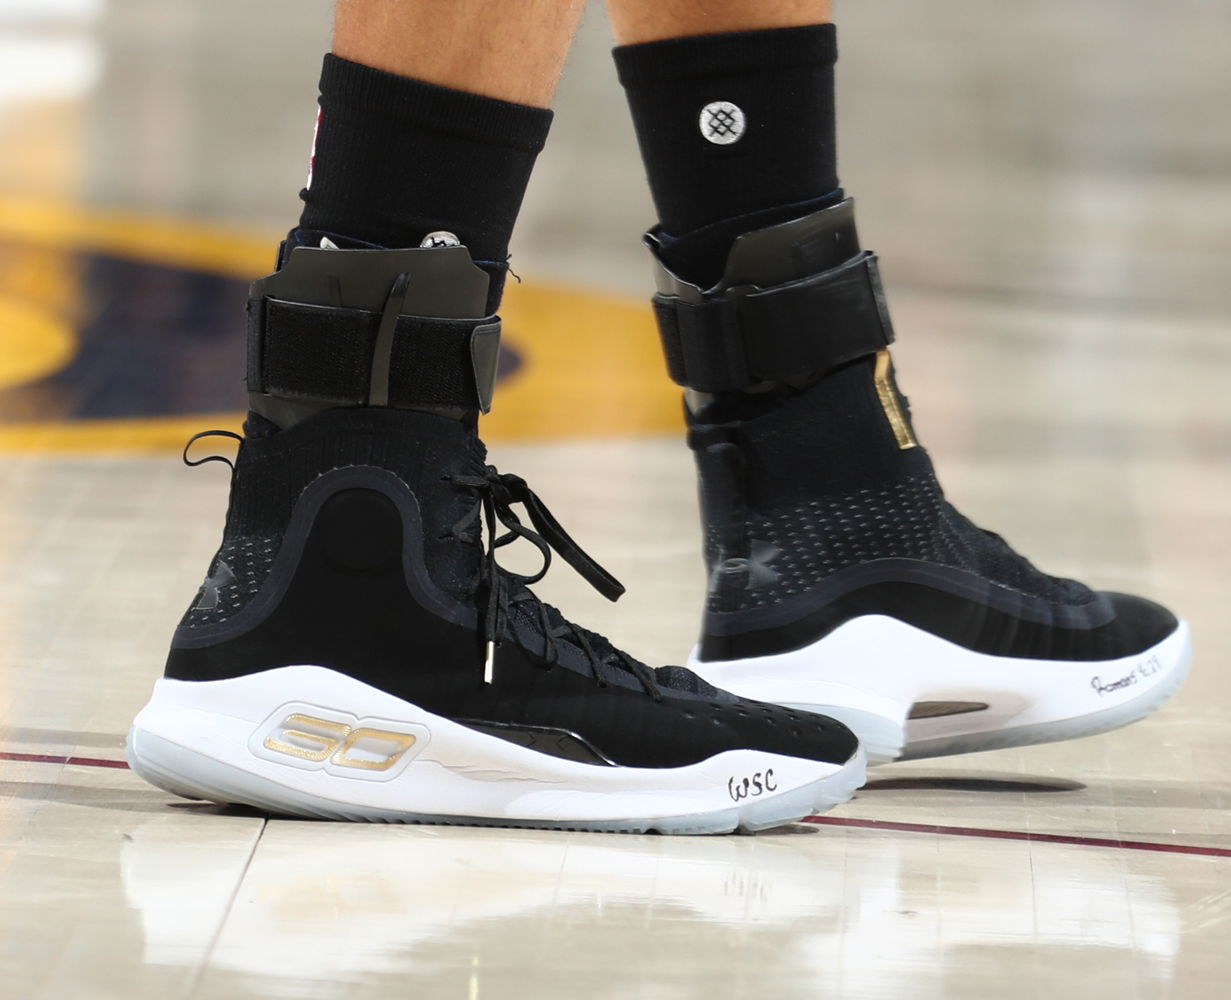 The Under Armour Curry 4 Expected To Release On October 17th